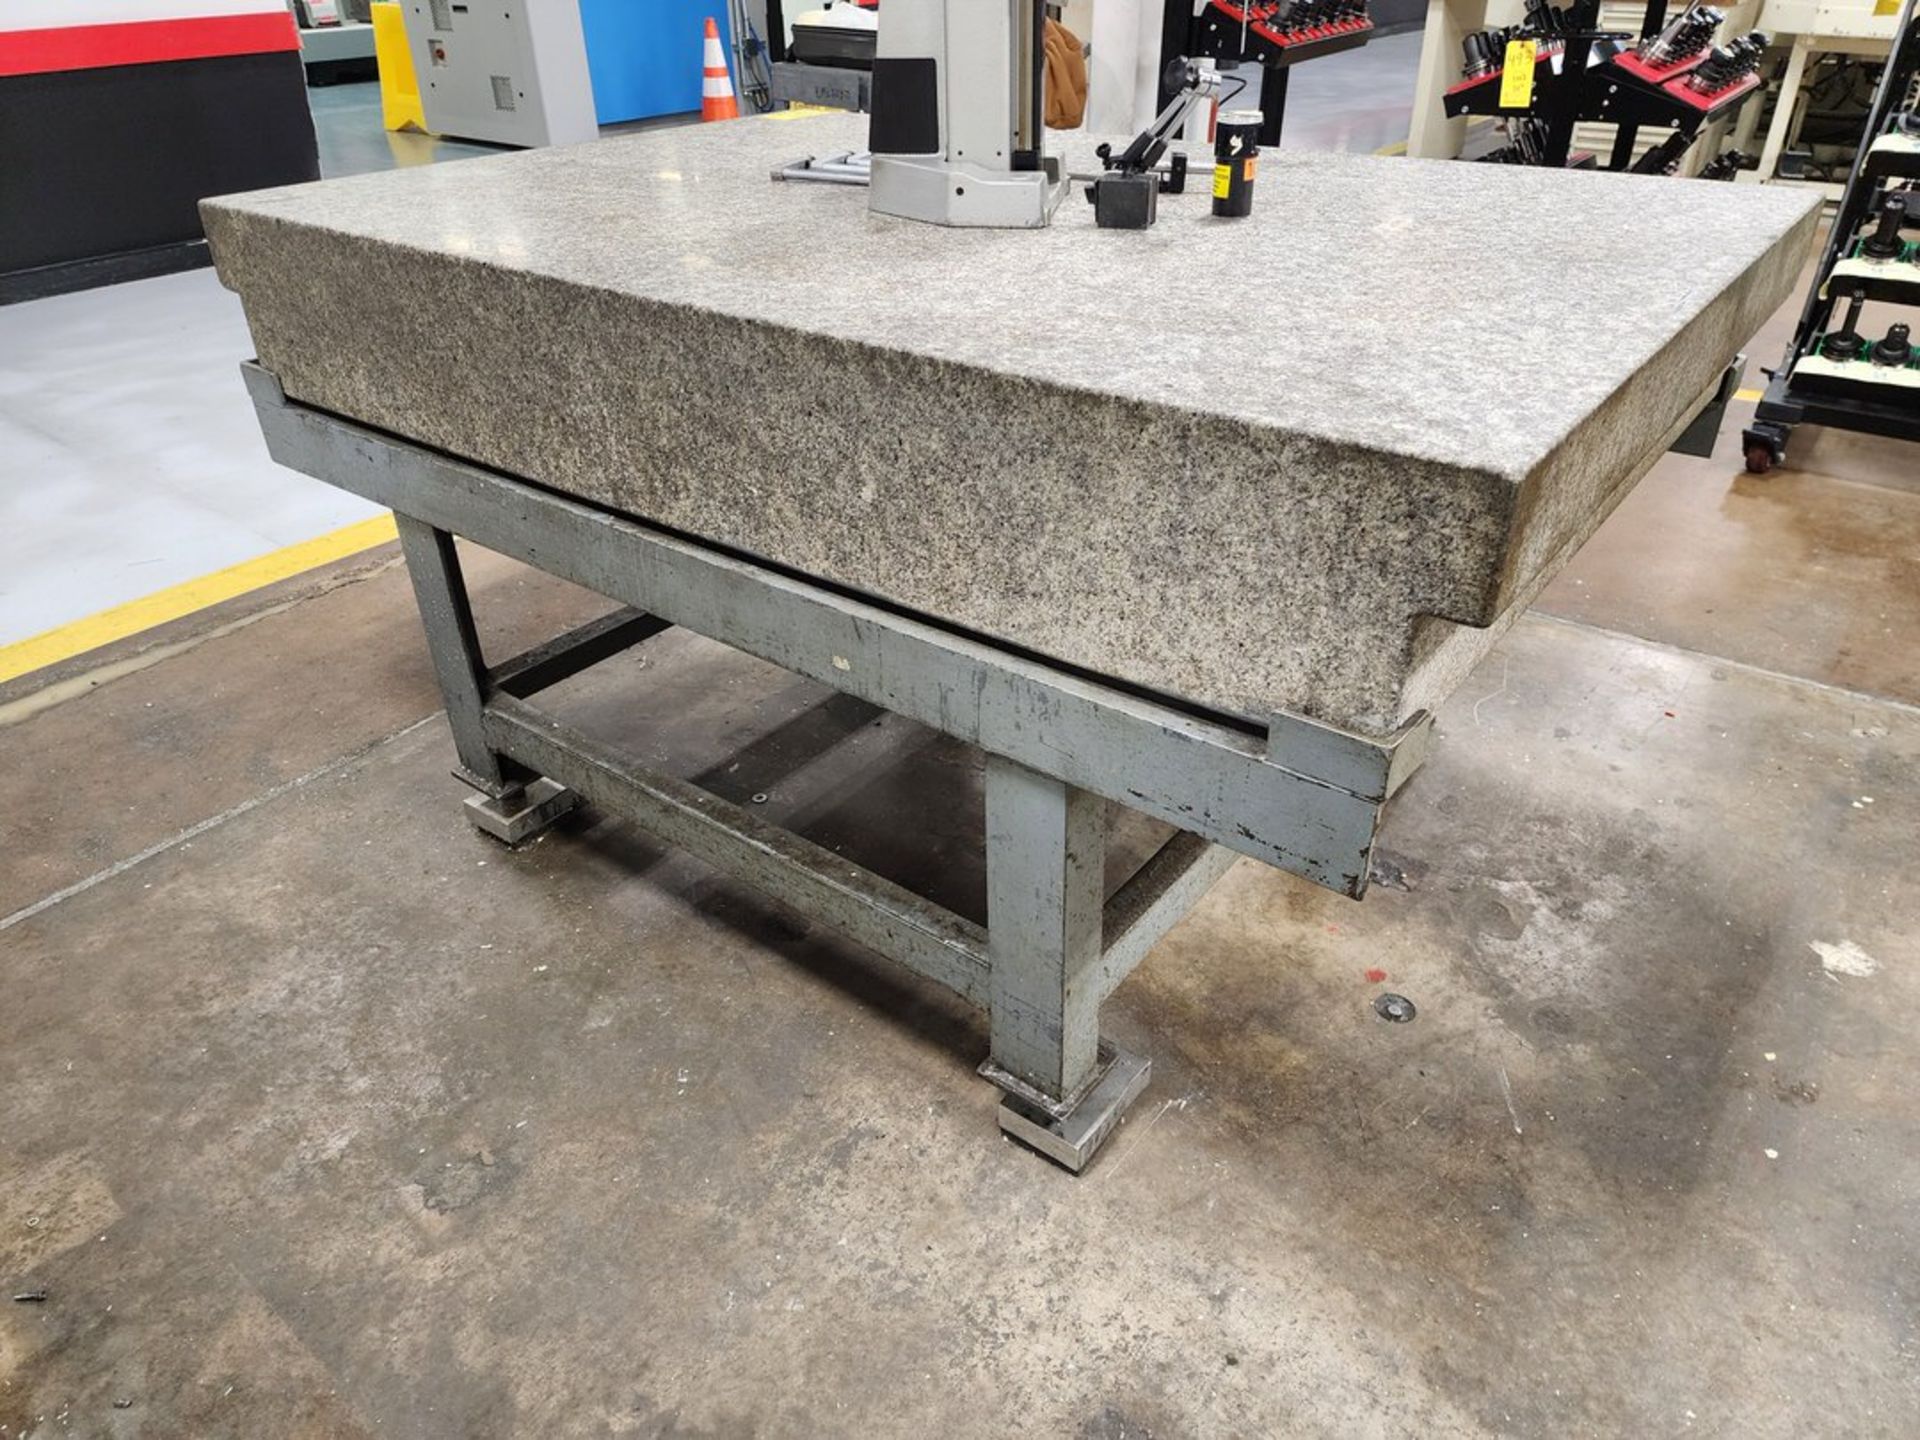 Surface Granite Plate W/ Stand 72"x48" - Image 5 of 5